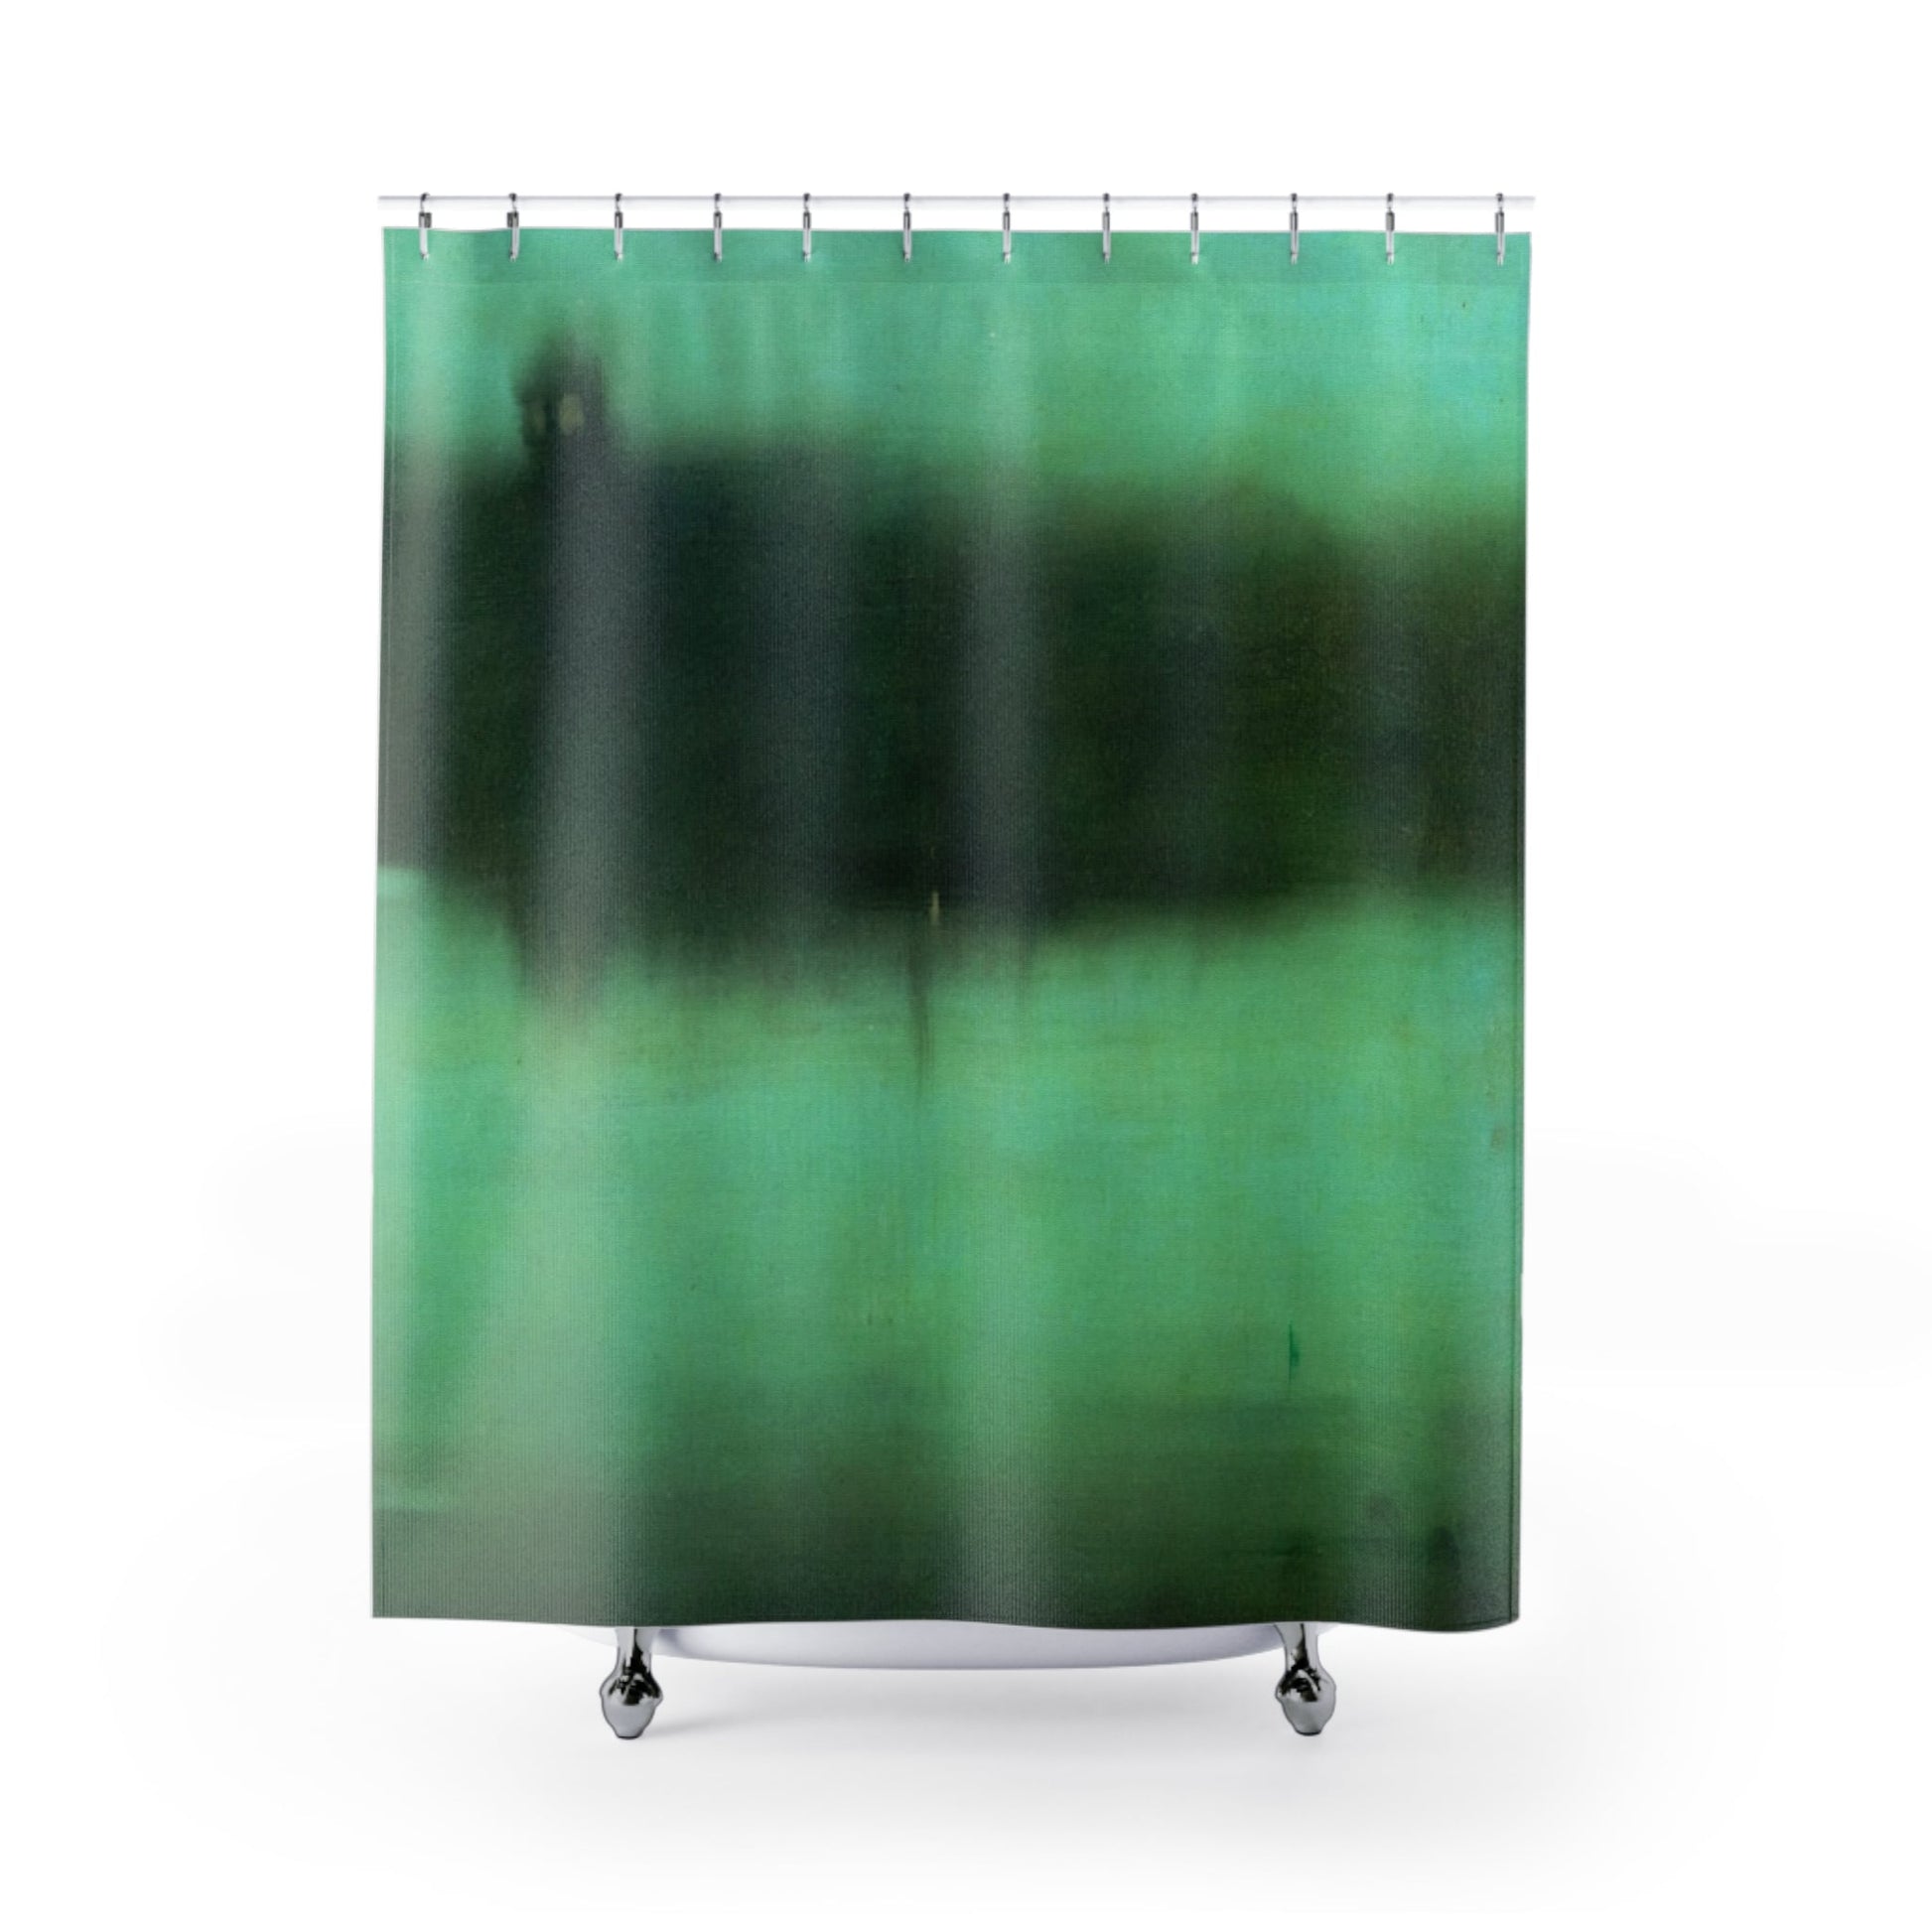 Black and Green Shower Curtain with abstract moody design, artistic bathroom decor featuring dark and moody patterns.